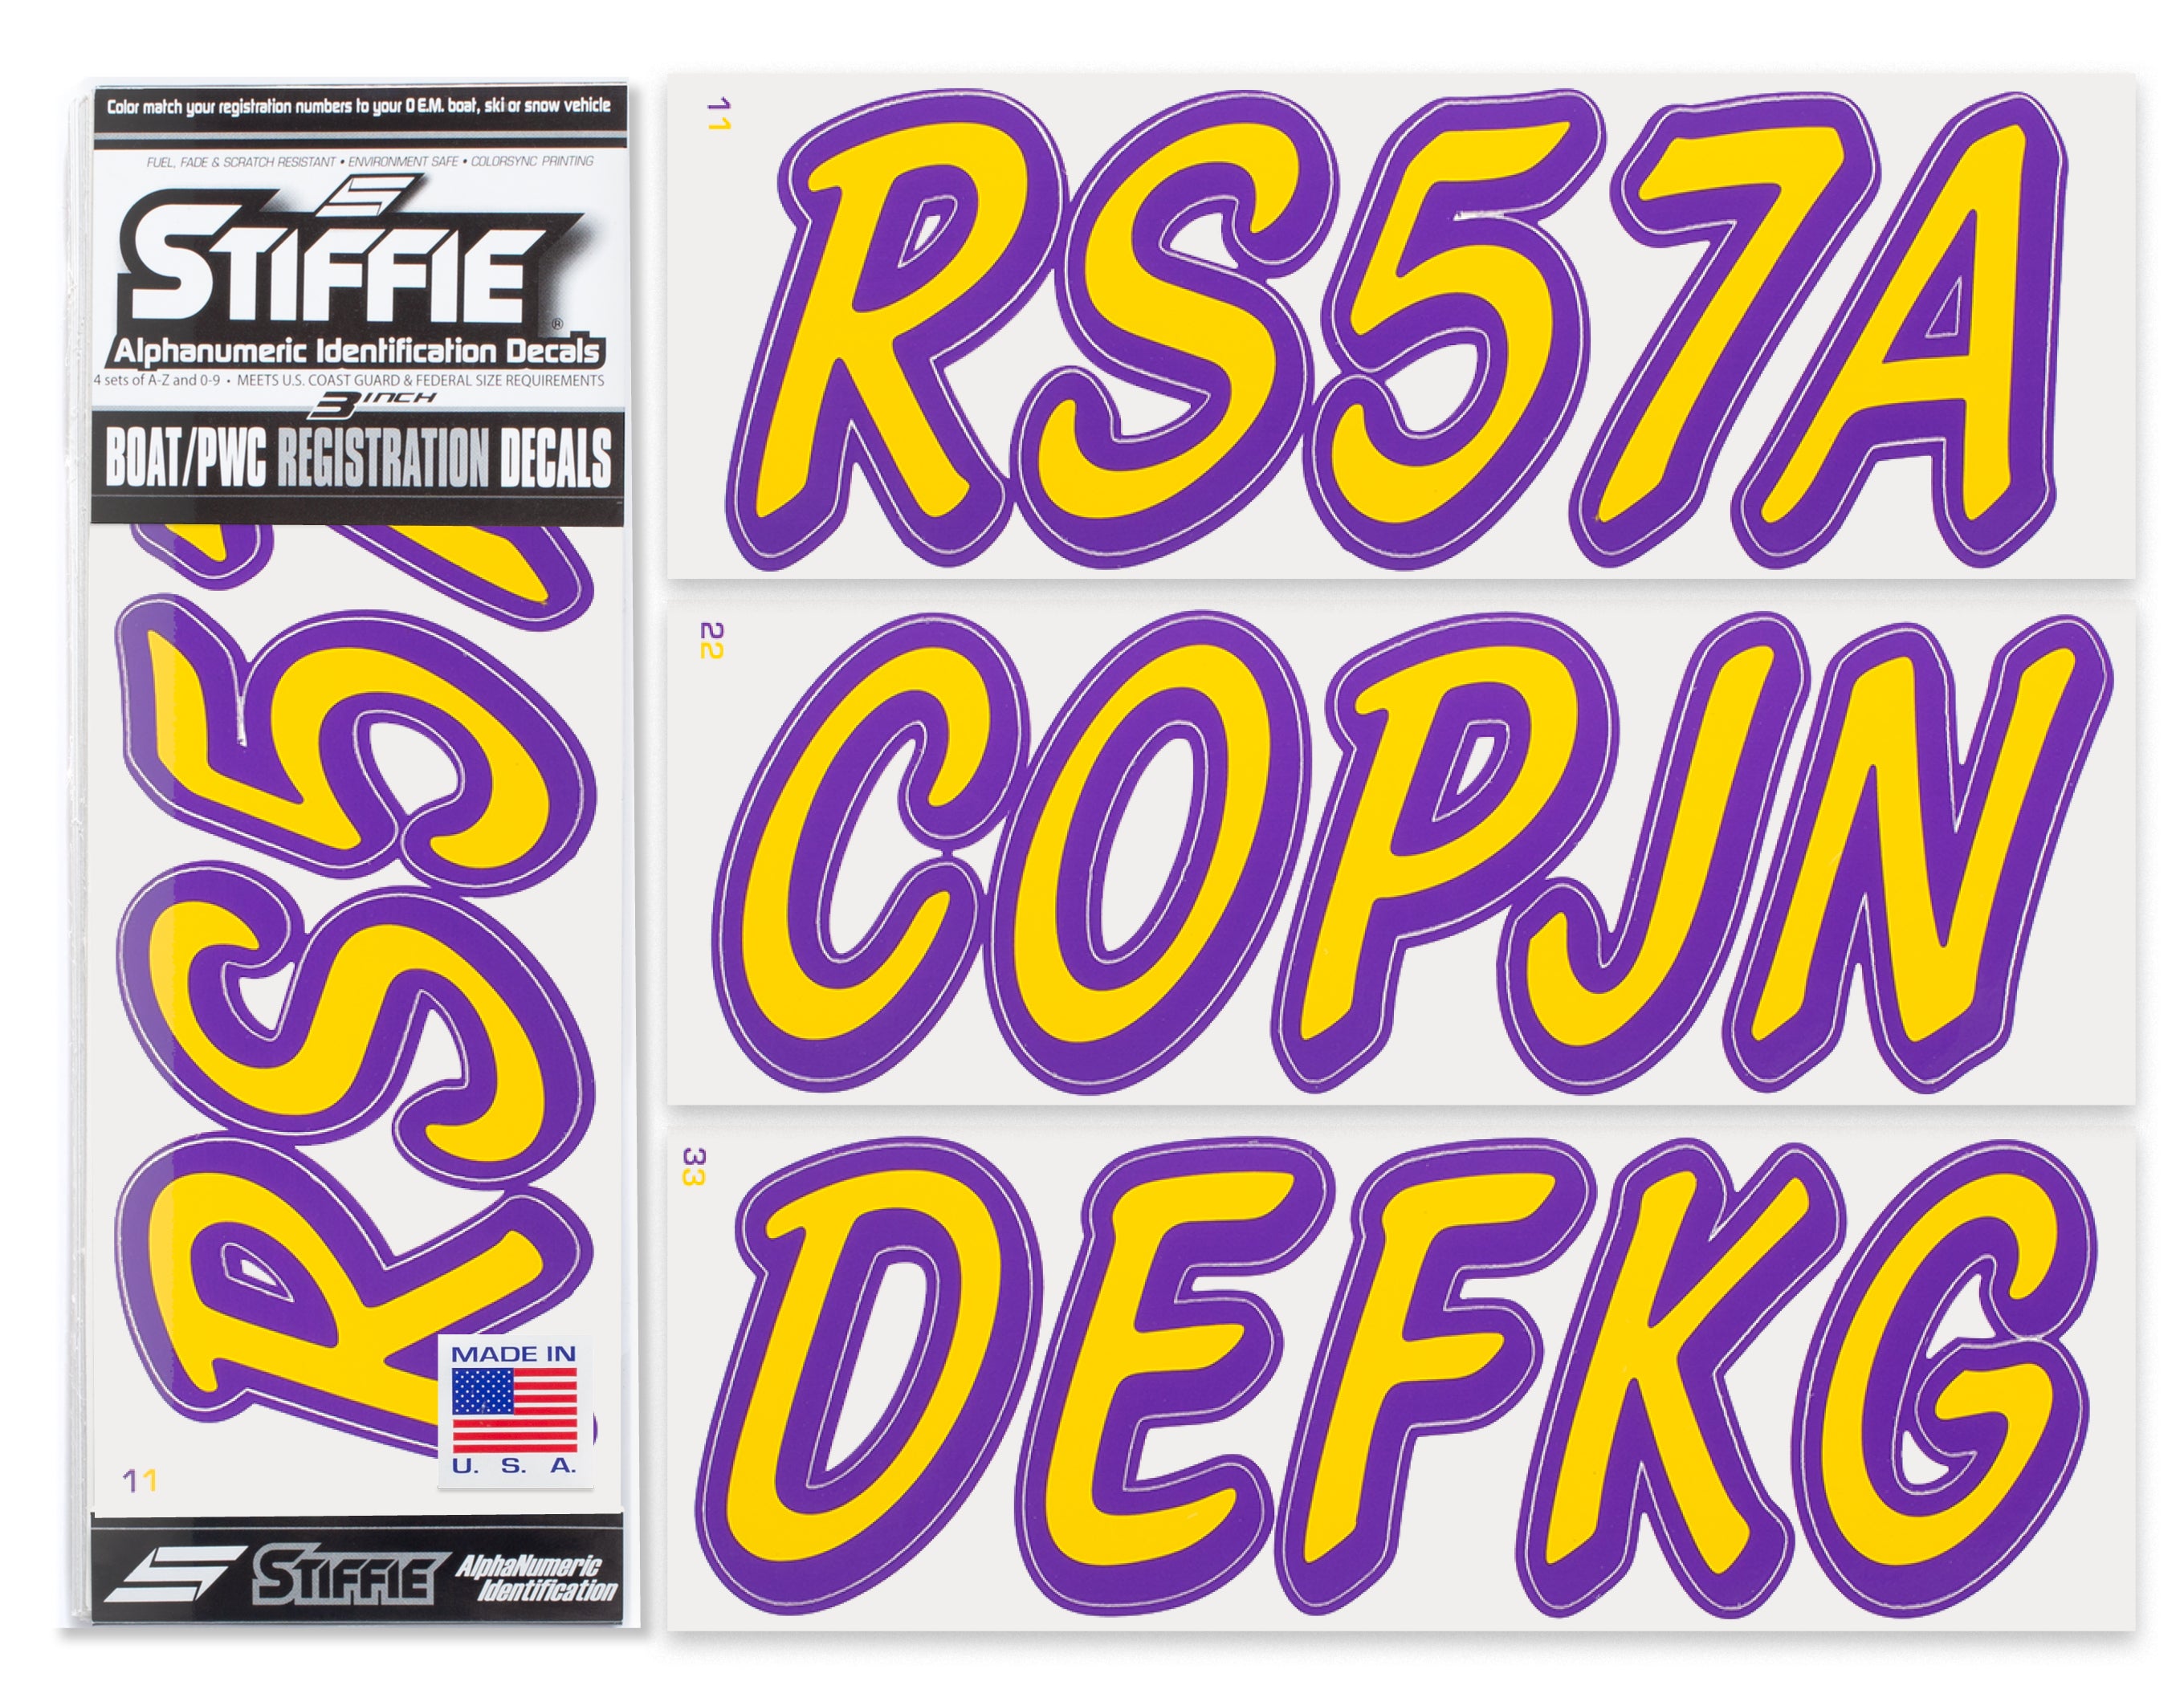 STIFFIE Whipline Solid Yellow/Purple 3" Alpha-Numeric Registration Identification Numbers Stickers Decals for Boats & Personal Watercraft